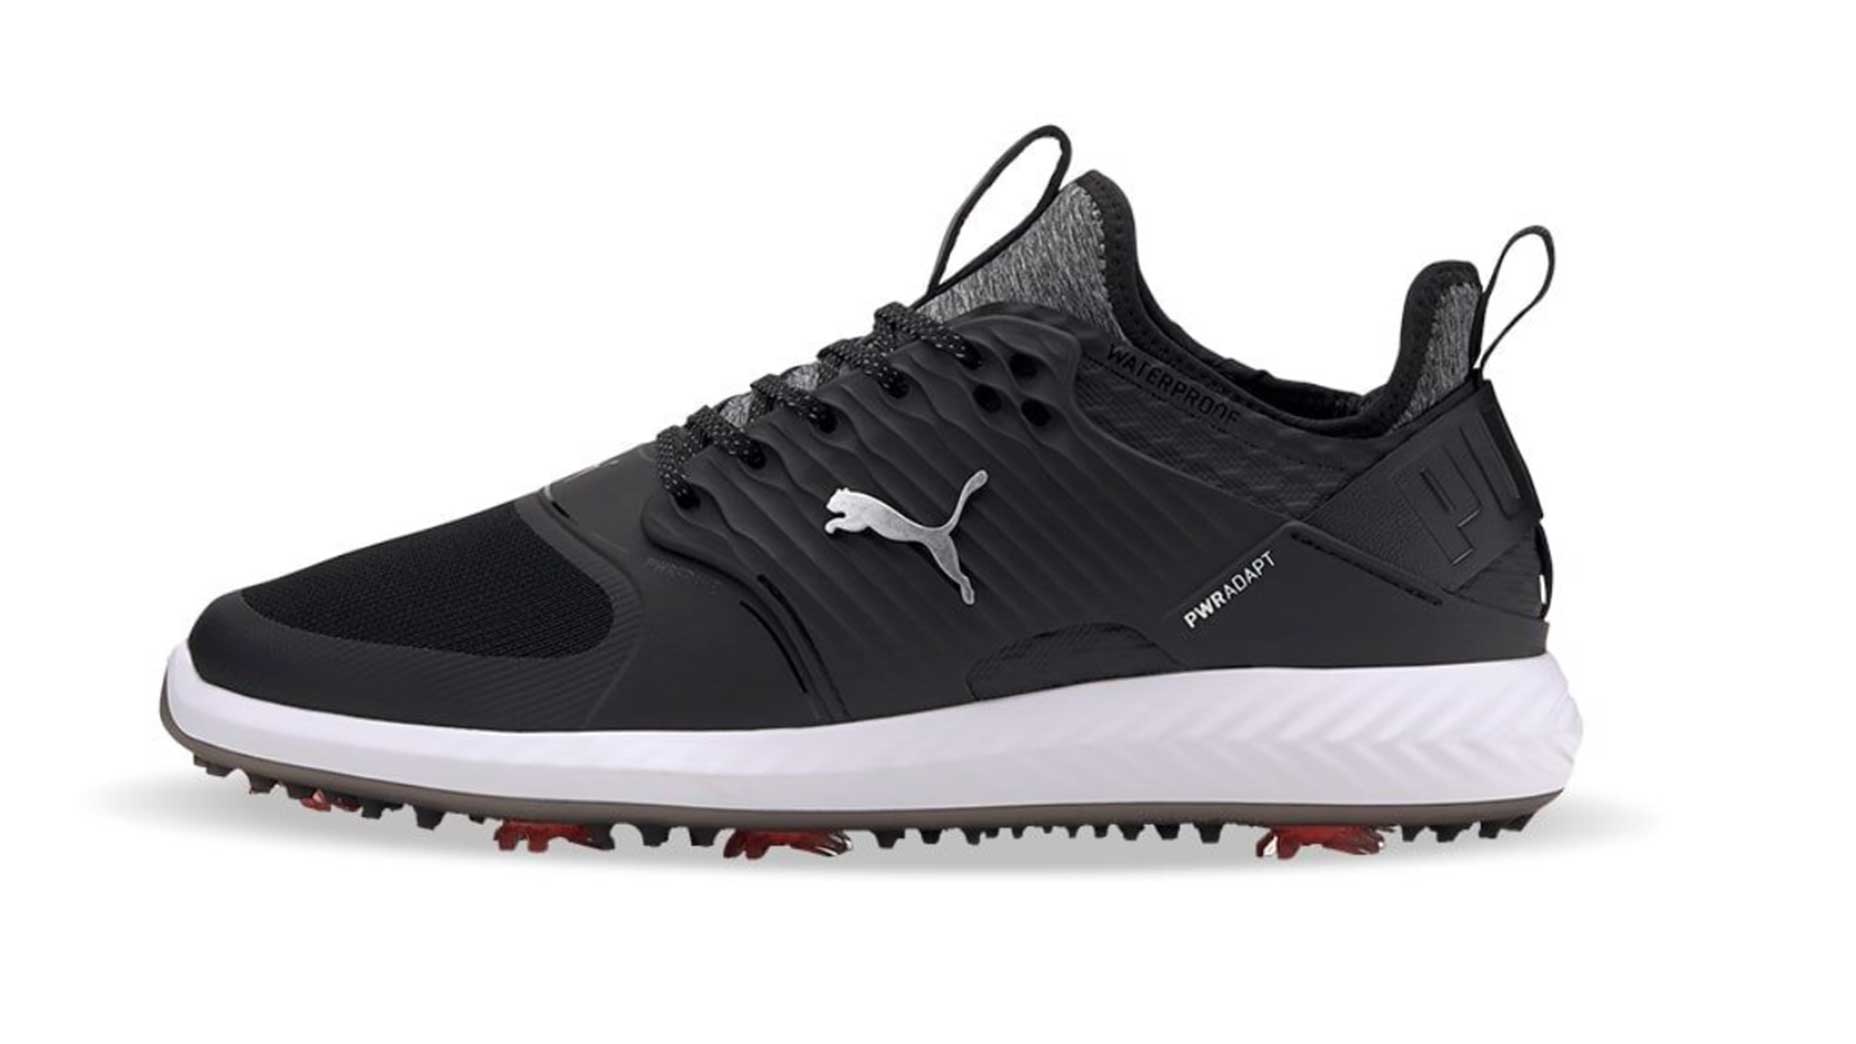 Pure deliver Specifically Puma IGNITE PWRADAPT Caged golf shoe is big on stability, comfort